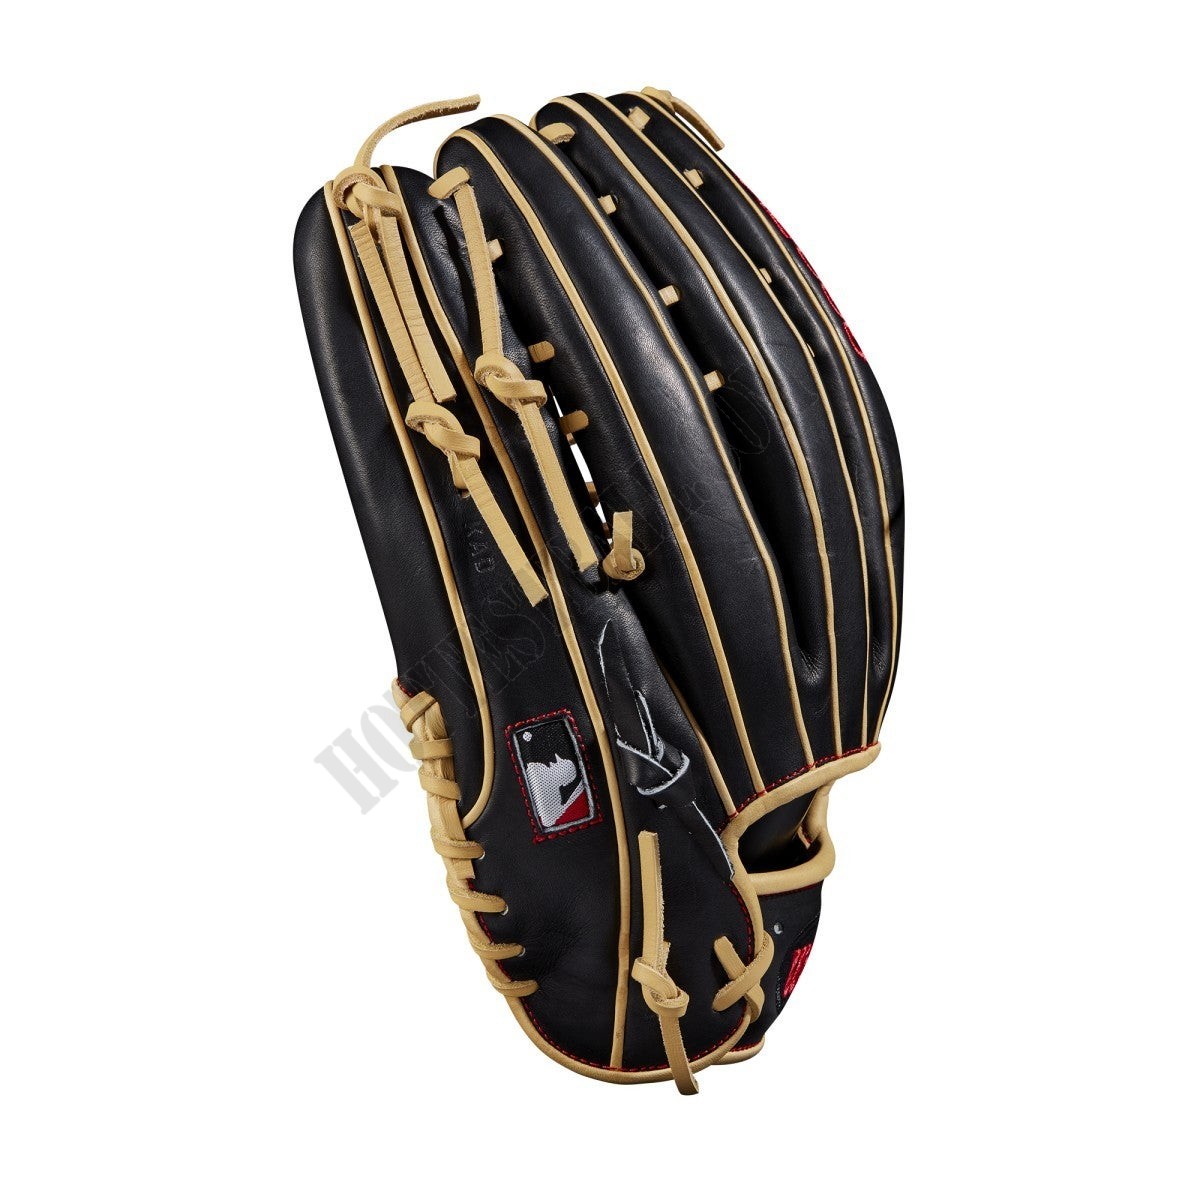 2020 A2000 OT6 12.75" Outfield Baseball Glove ● Wilson Promotions - -4